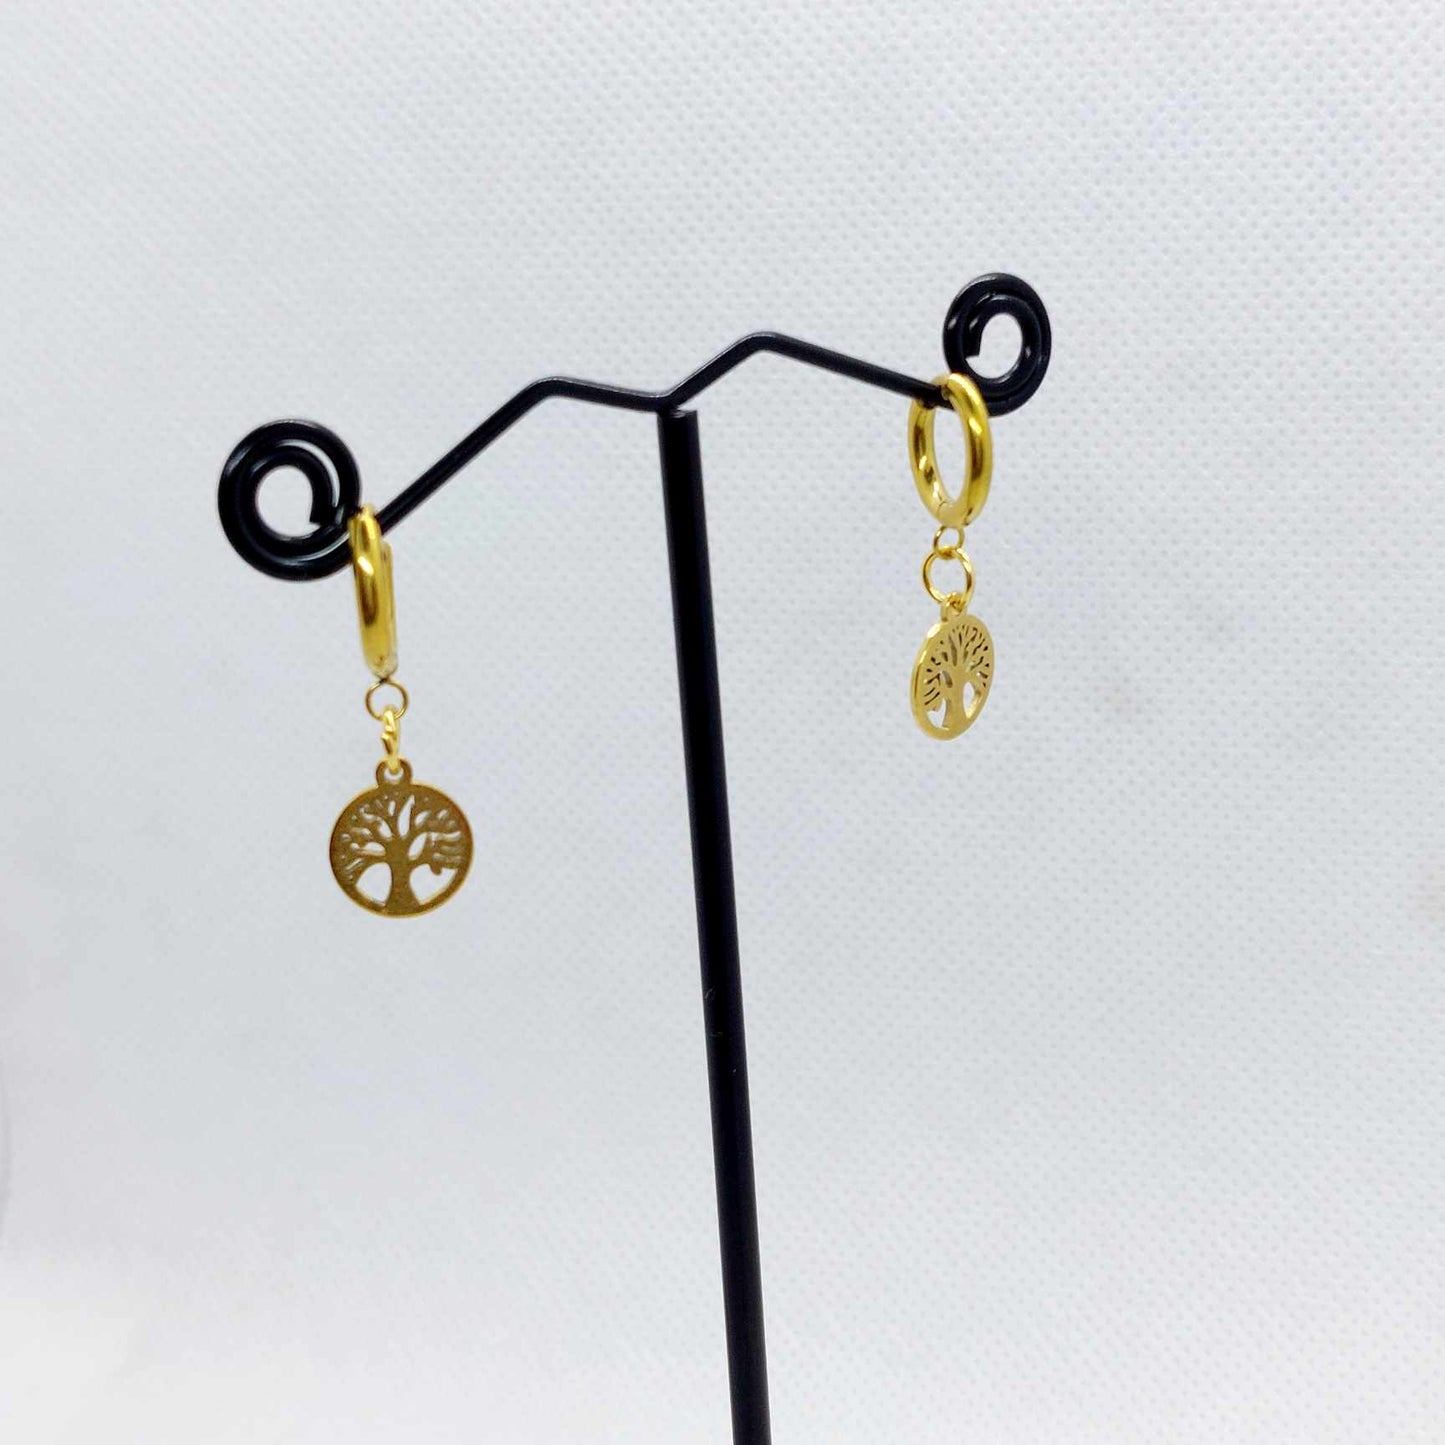 Tree of Life on a Hoop Earrings in Gold Plated Stainless Steel